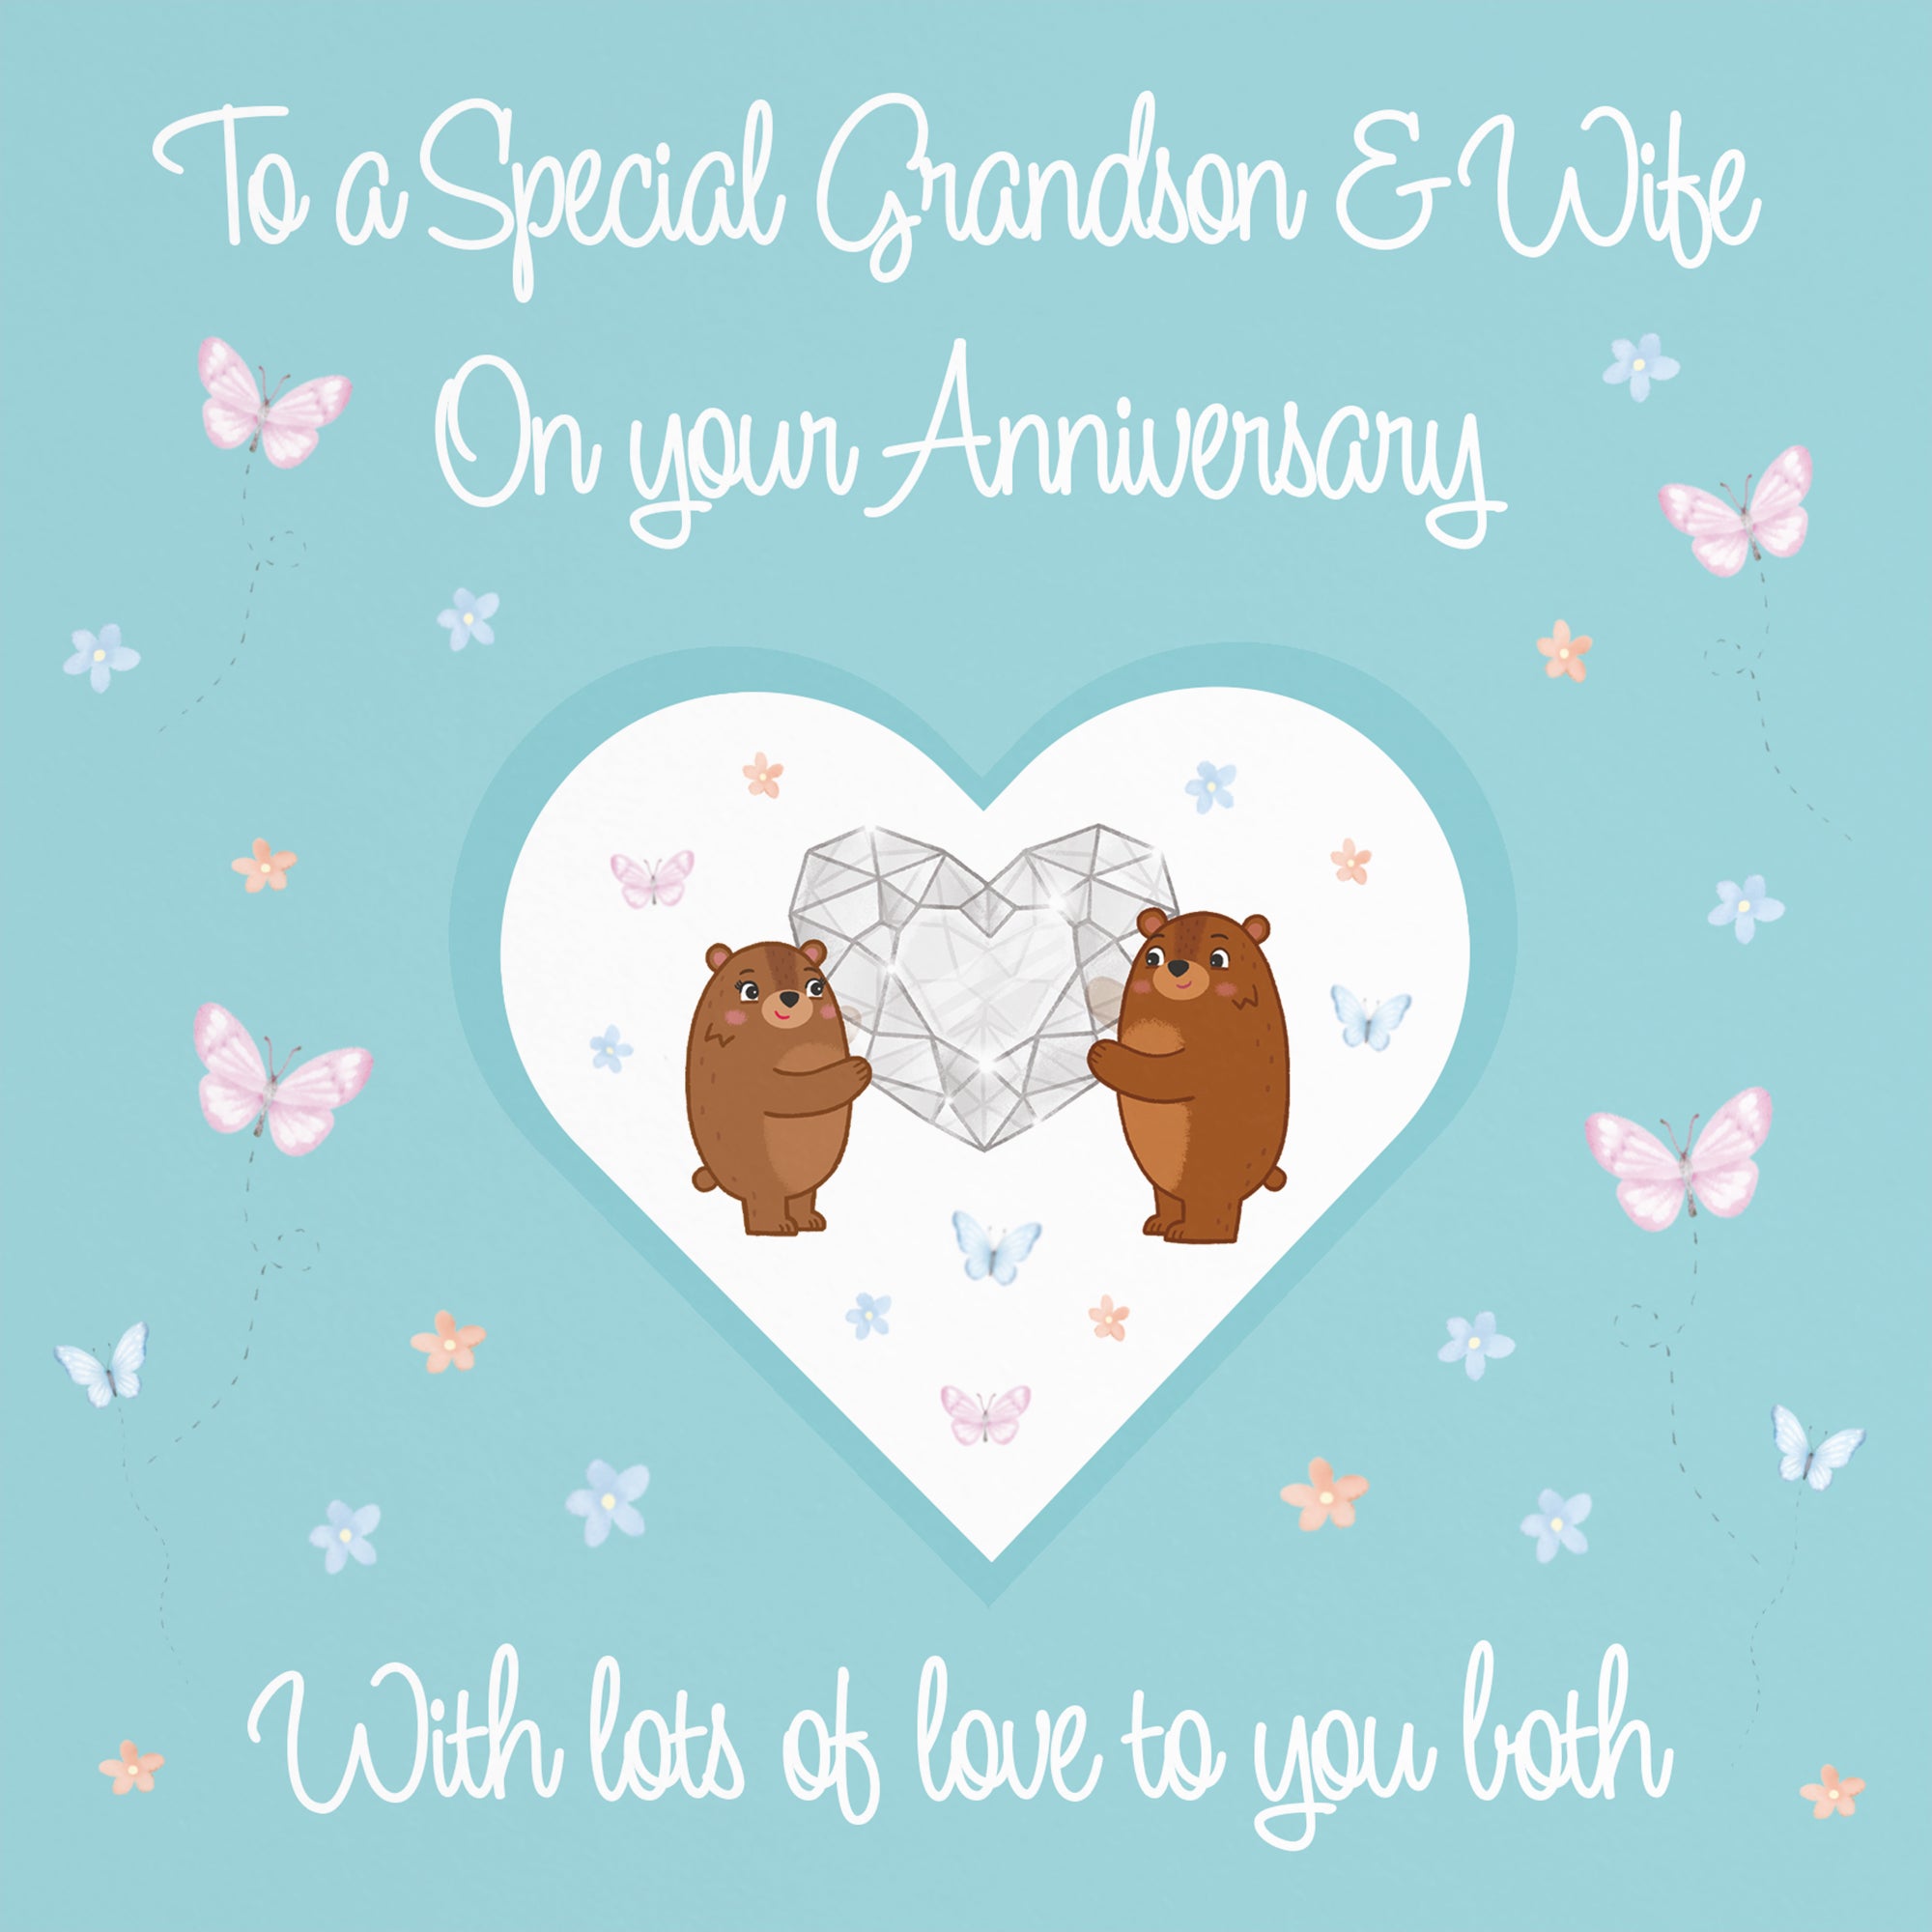 Grandson And Wife Anniversary Card Romantic Meadows